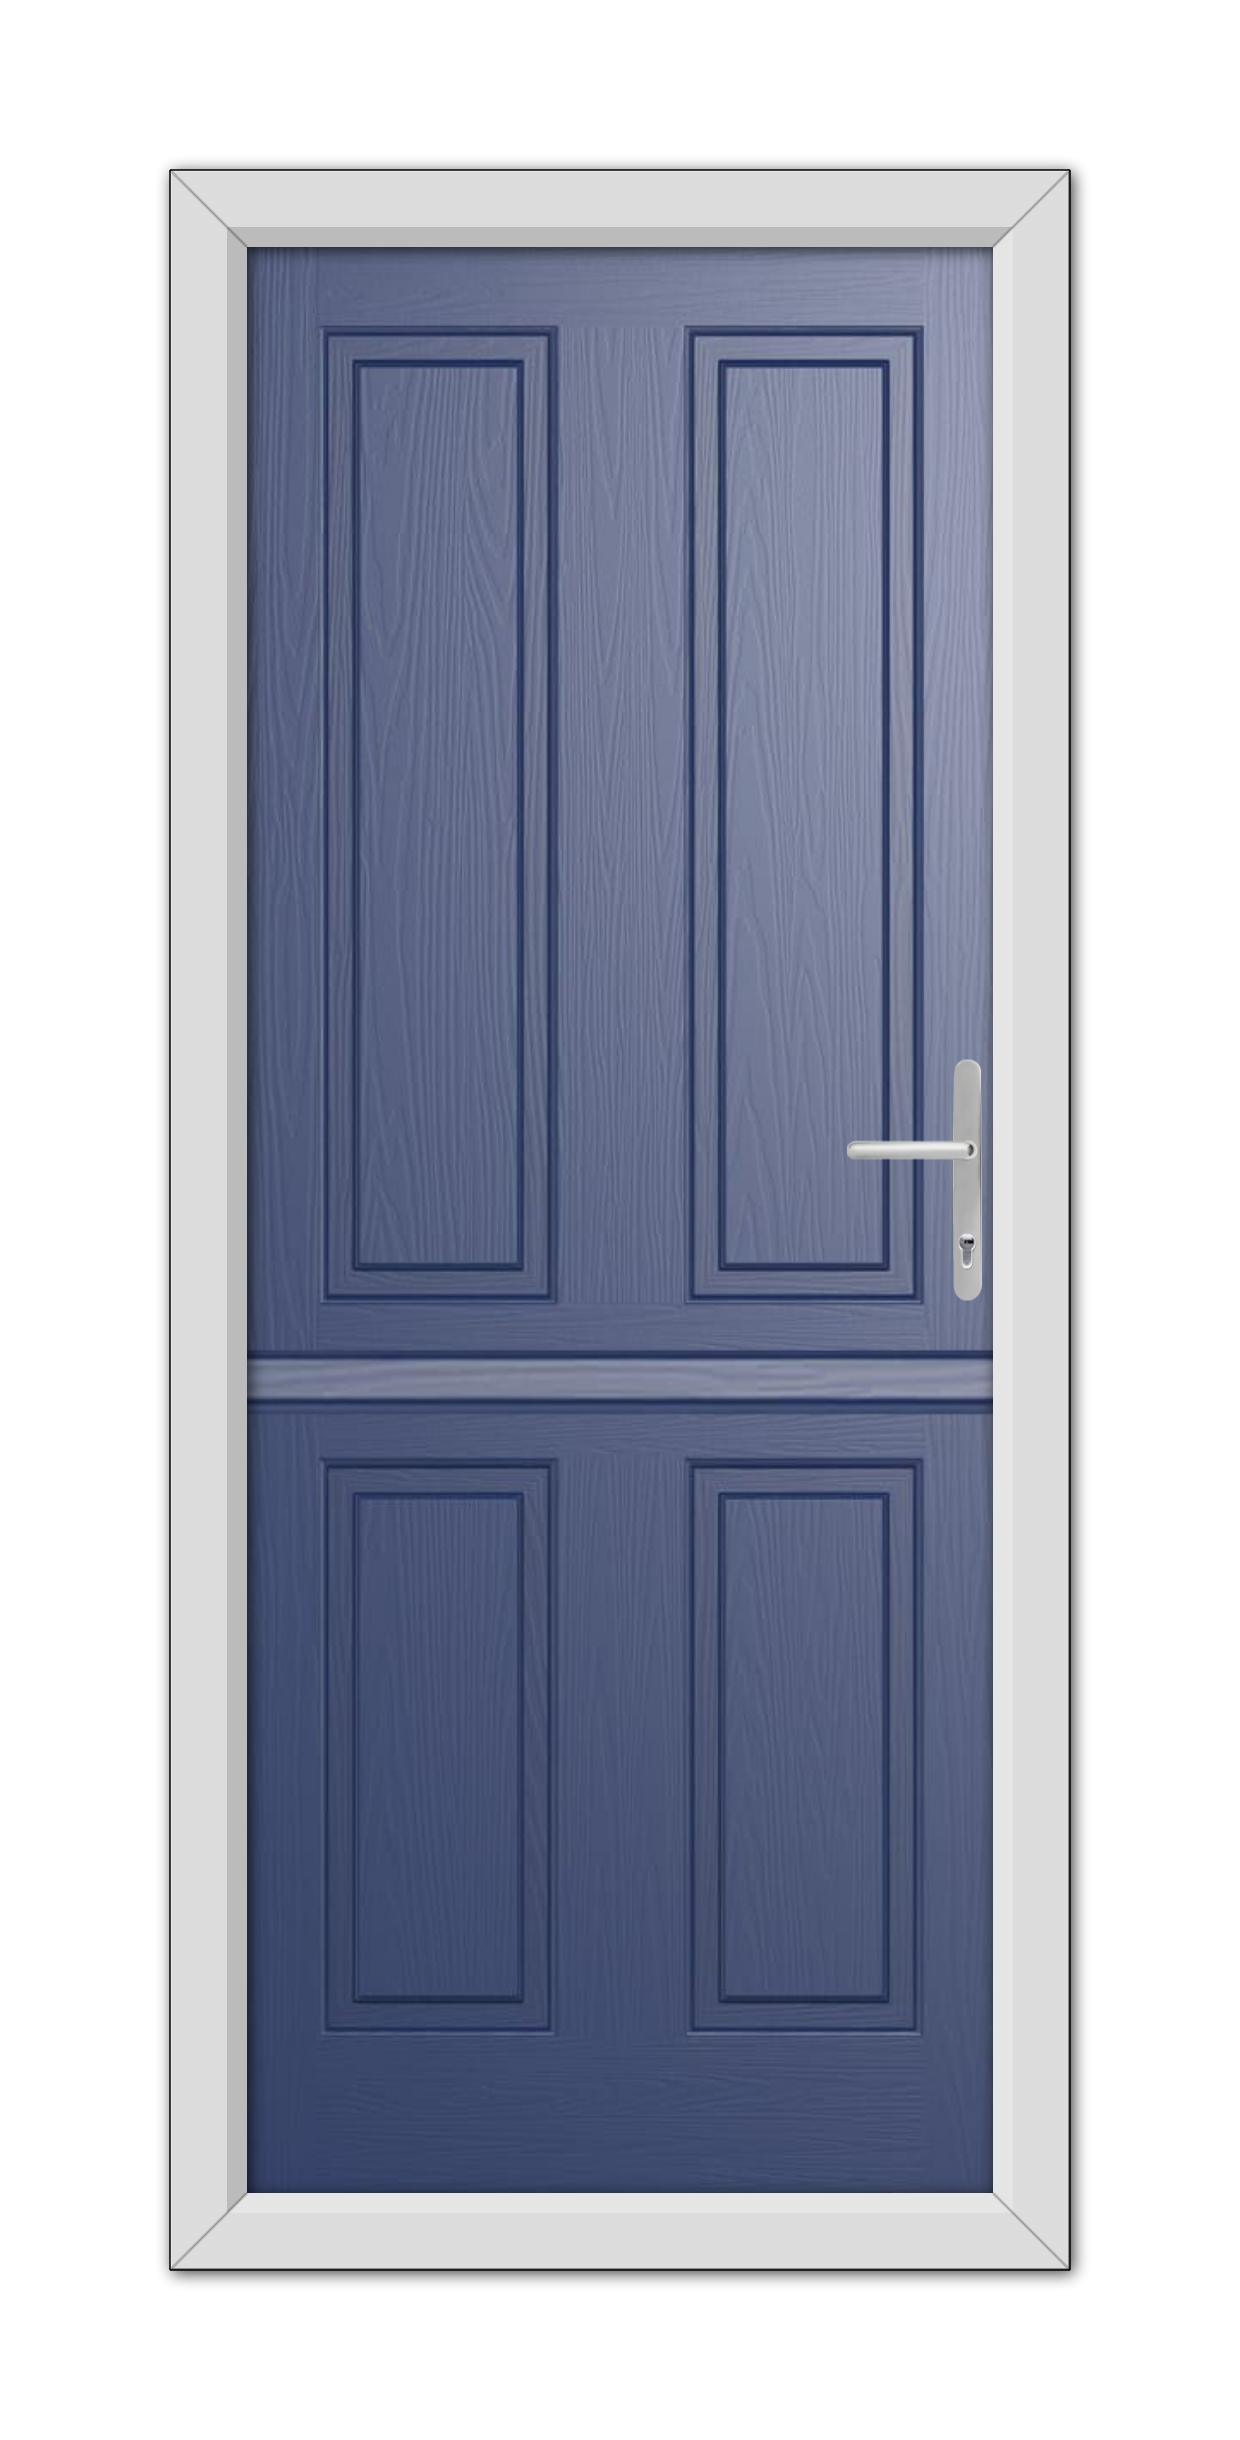 A Blue Whitmore Solid Stable Composite Door 48mm Timber Core with a white frame and a metallic handle, featuring a four-panel design.